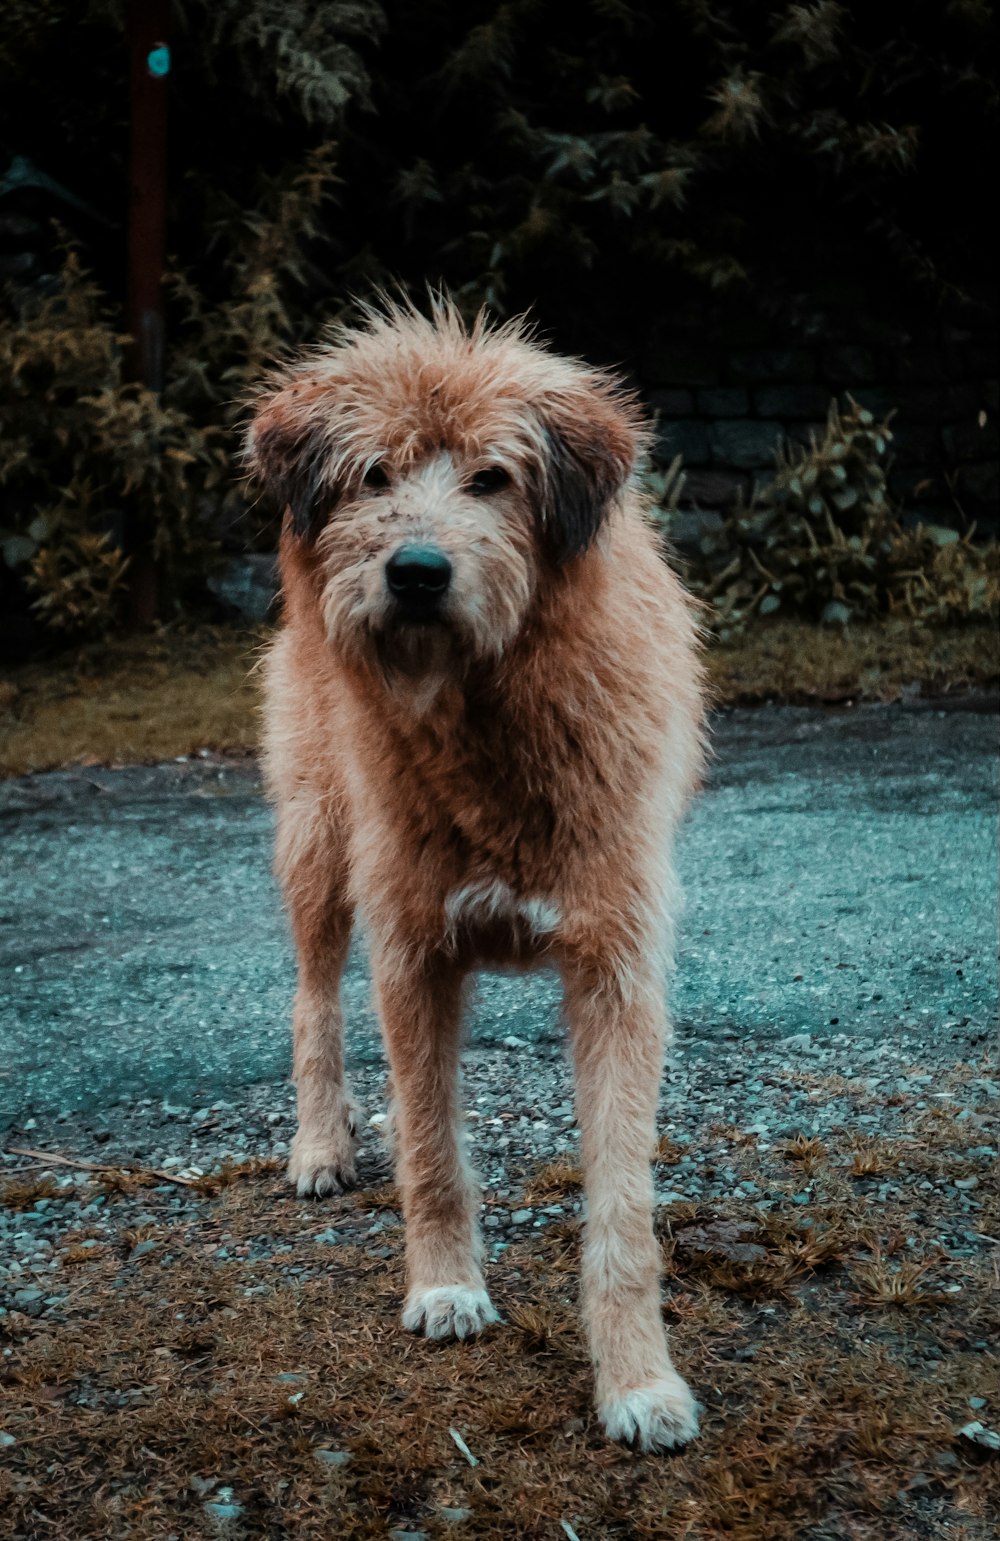 a shaggy brown dog standing on top of a dirt field